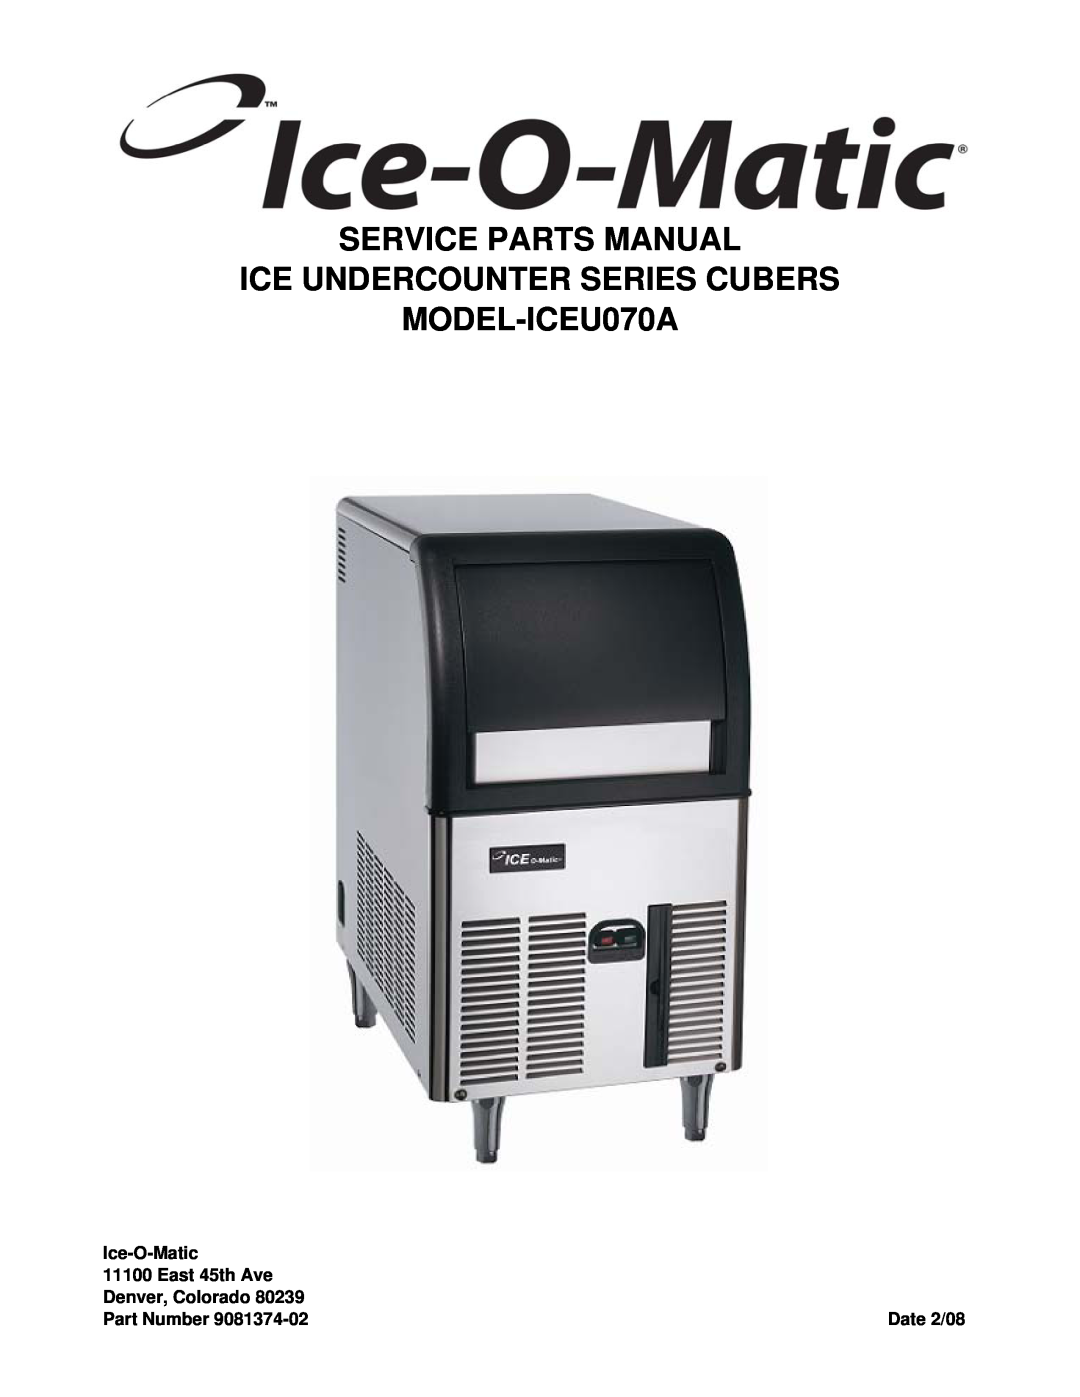 Ice-O-Matic manual Service Parts Manual, ICE UNDERCOUNTER SERIES CUBERS MODEL-ICEU070A, Ice-O-Matic, East 45th Ave 